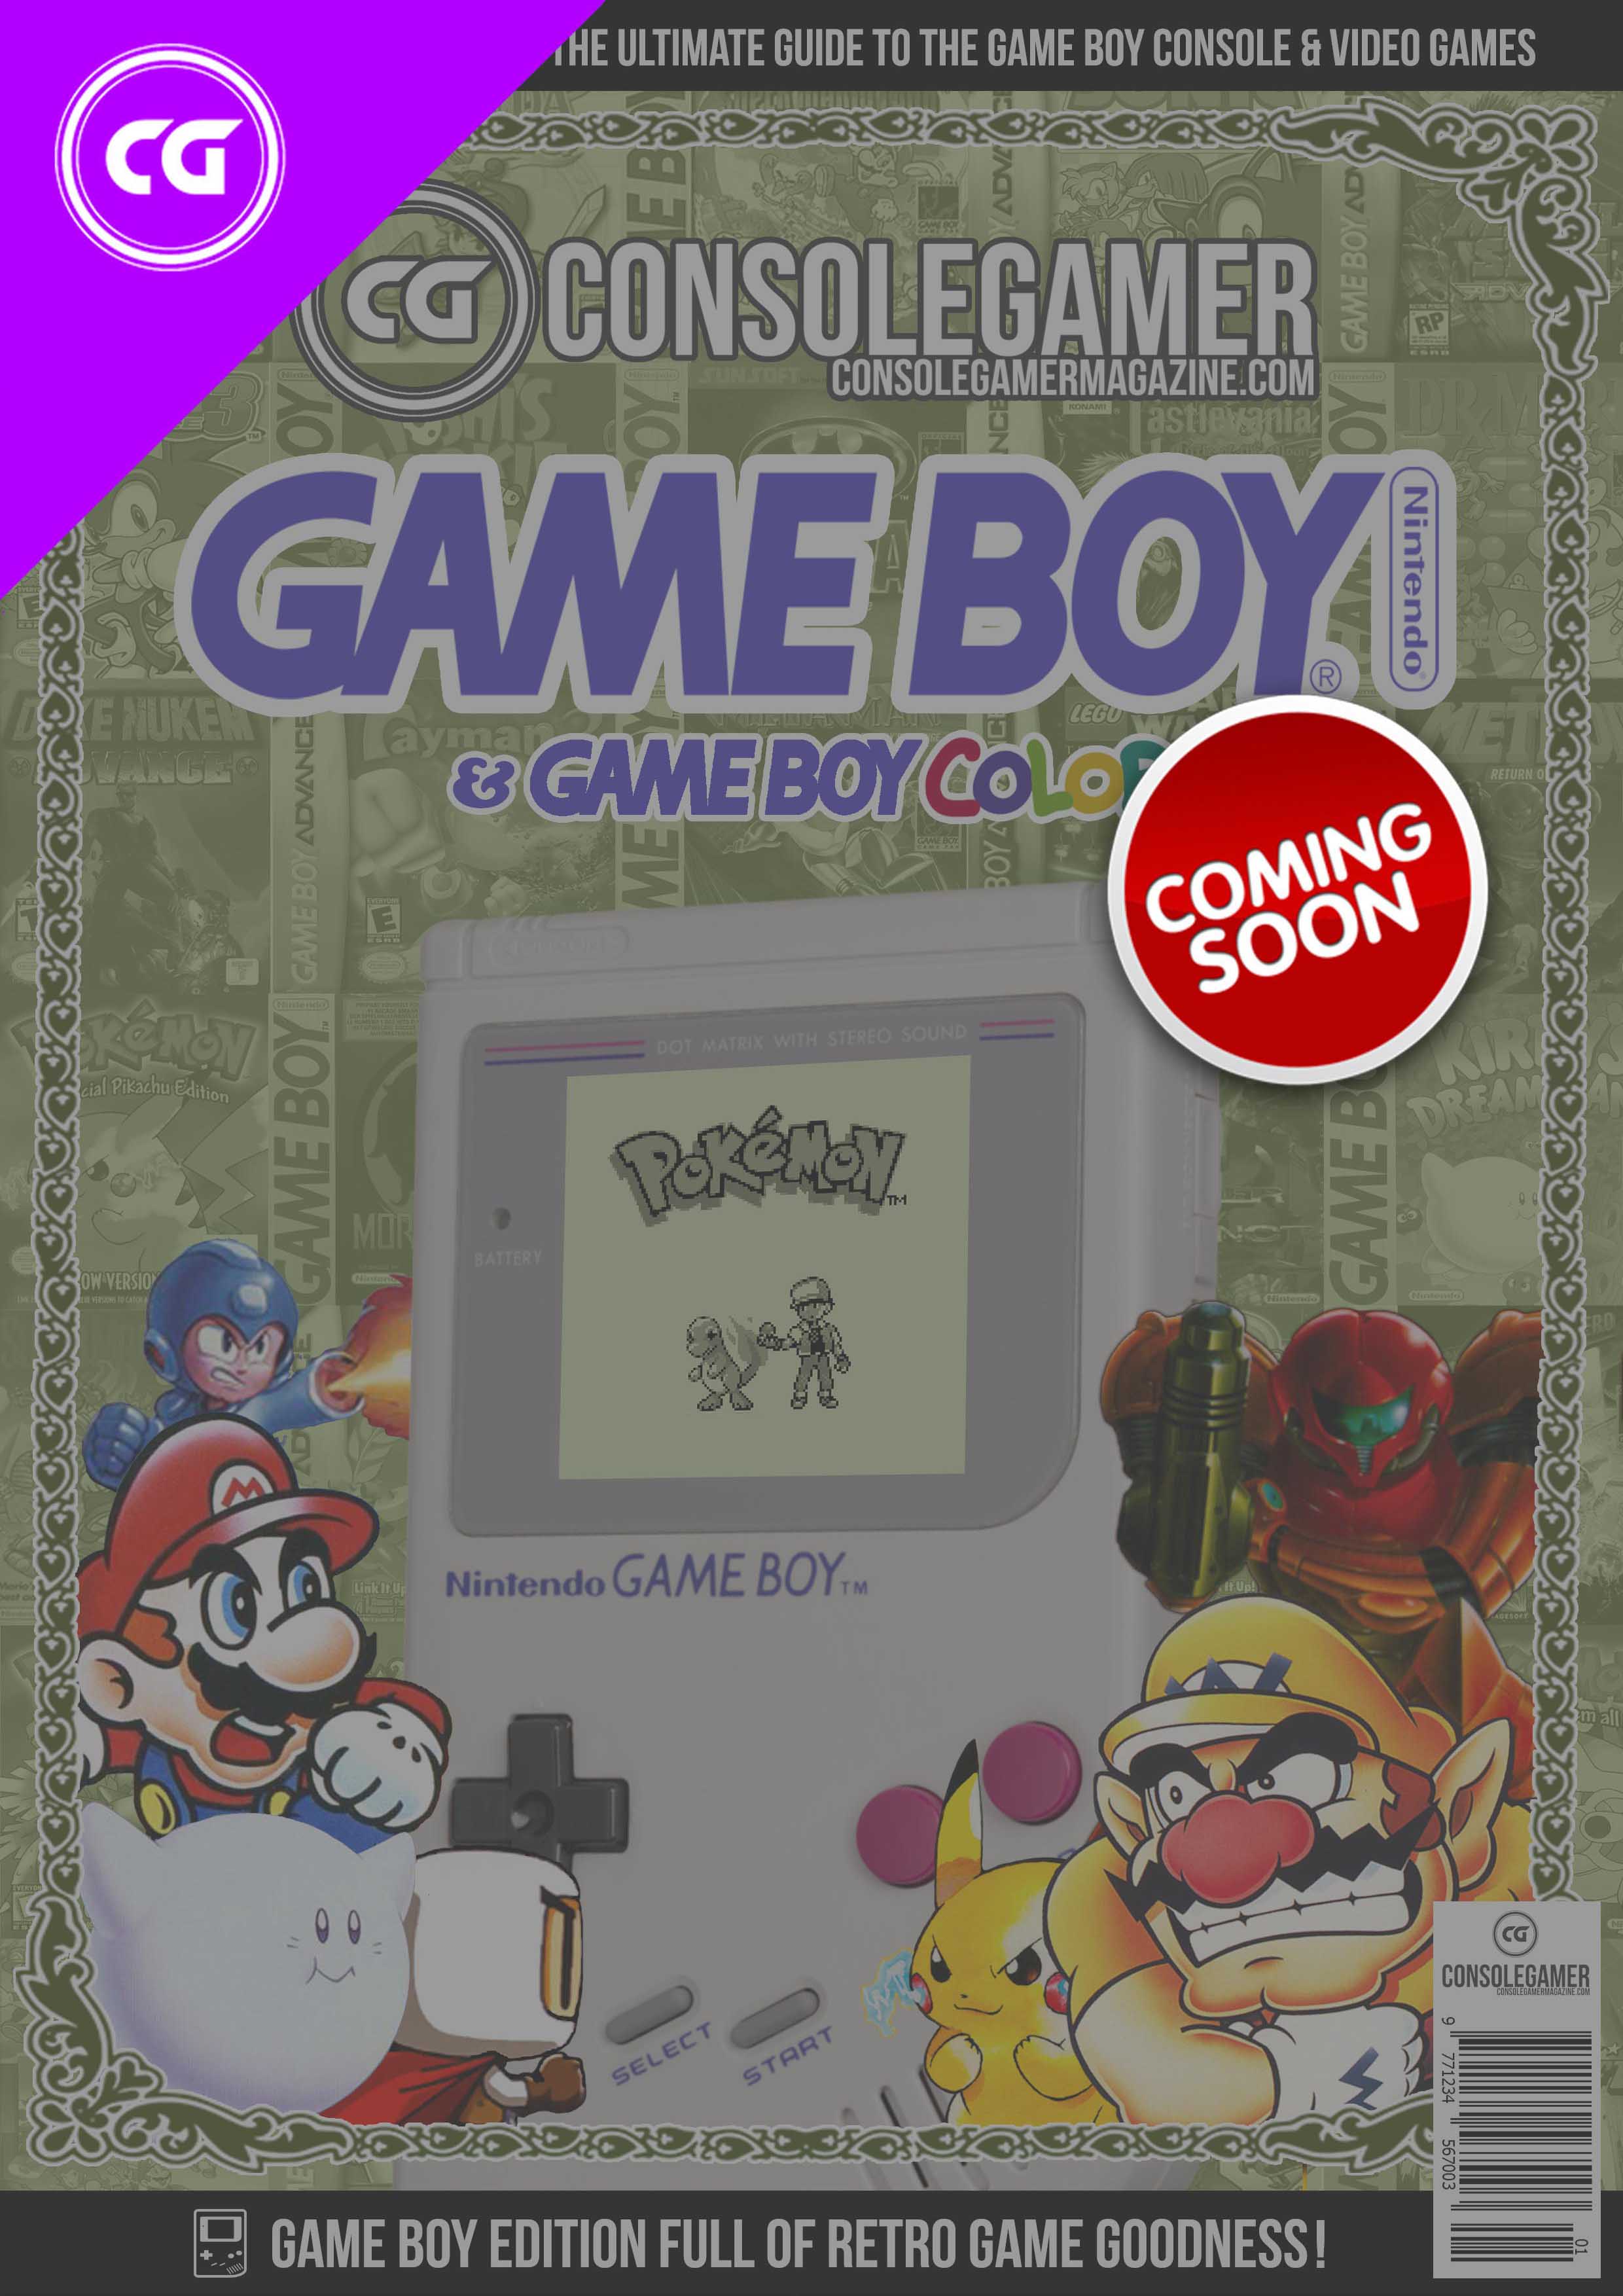 Console Gamer Magazine issue 4 gameboy classic